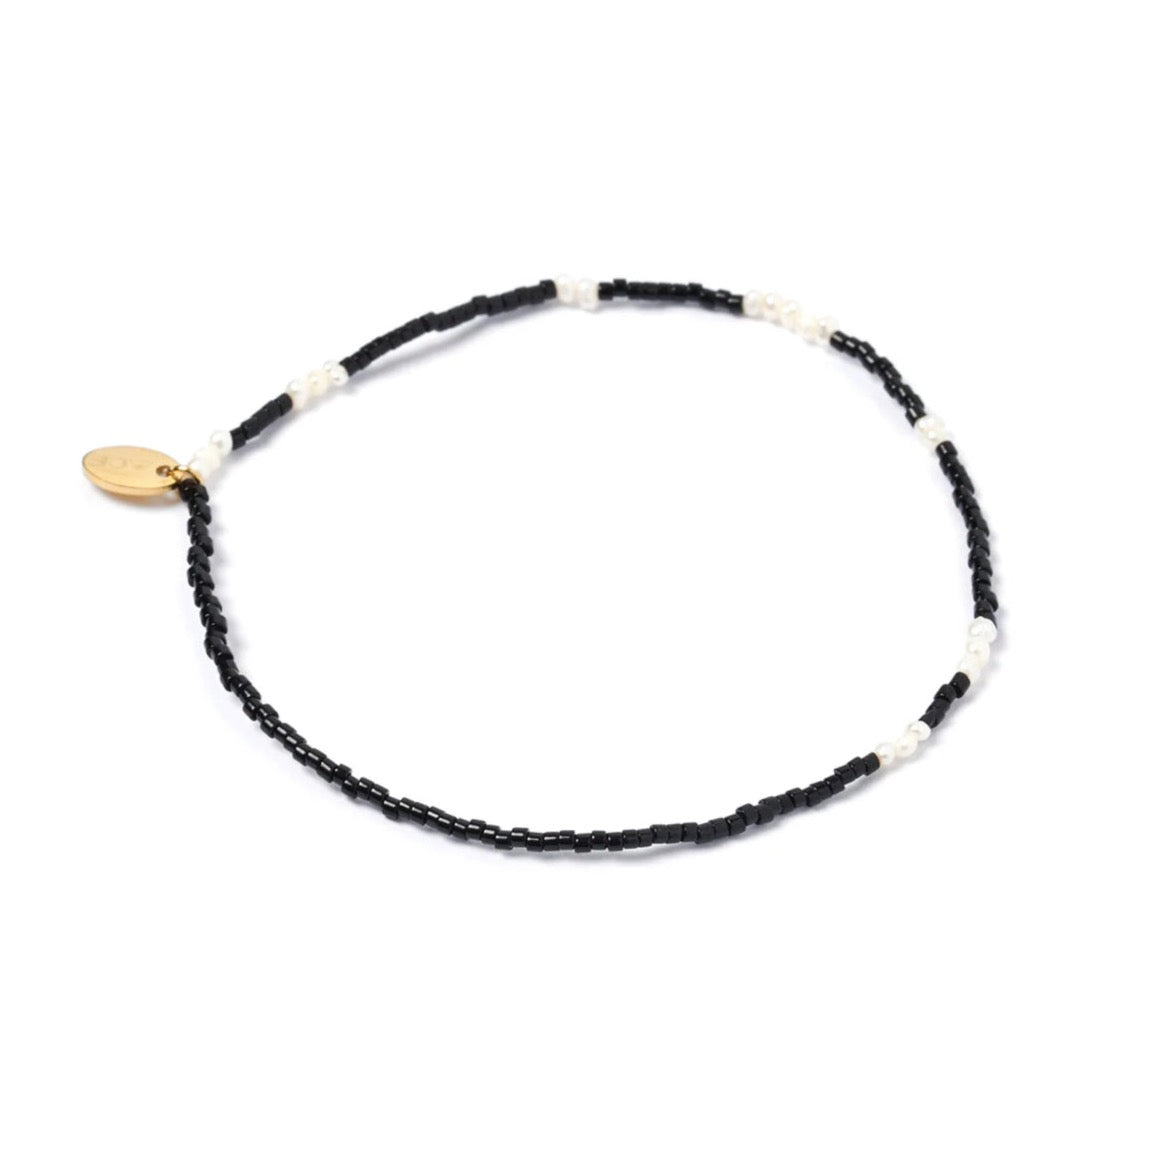 Poppy Pearl + Glass Beaded Anklet Black by Arms of Eve